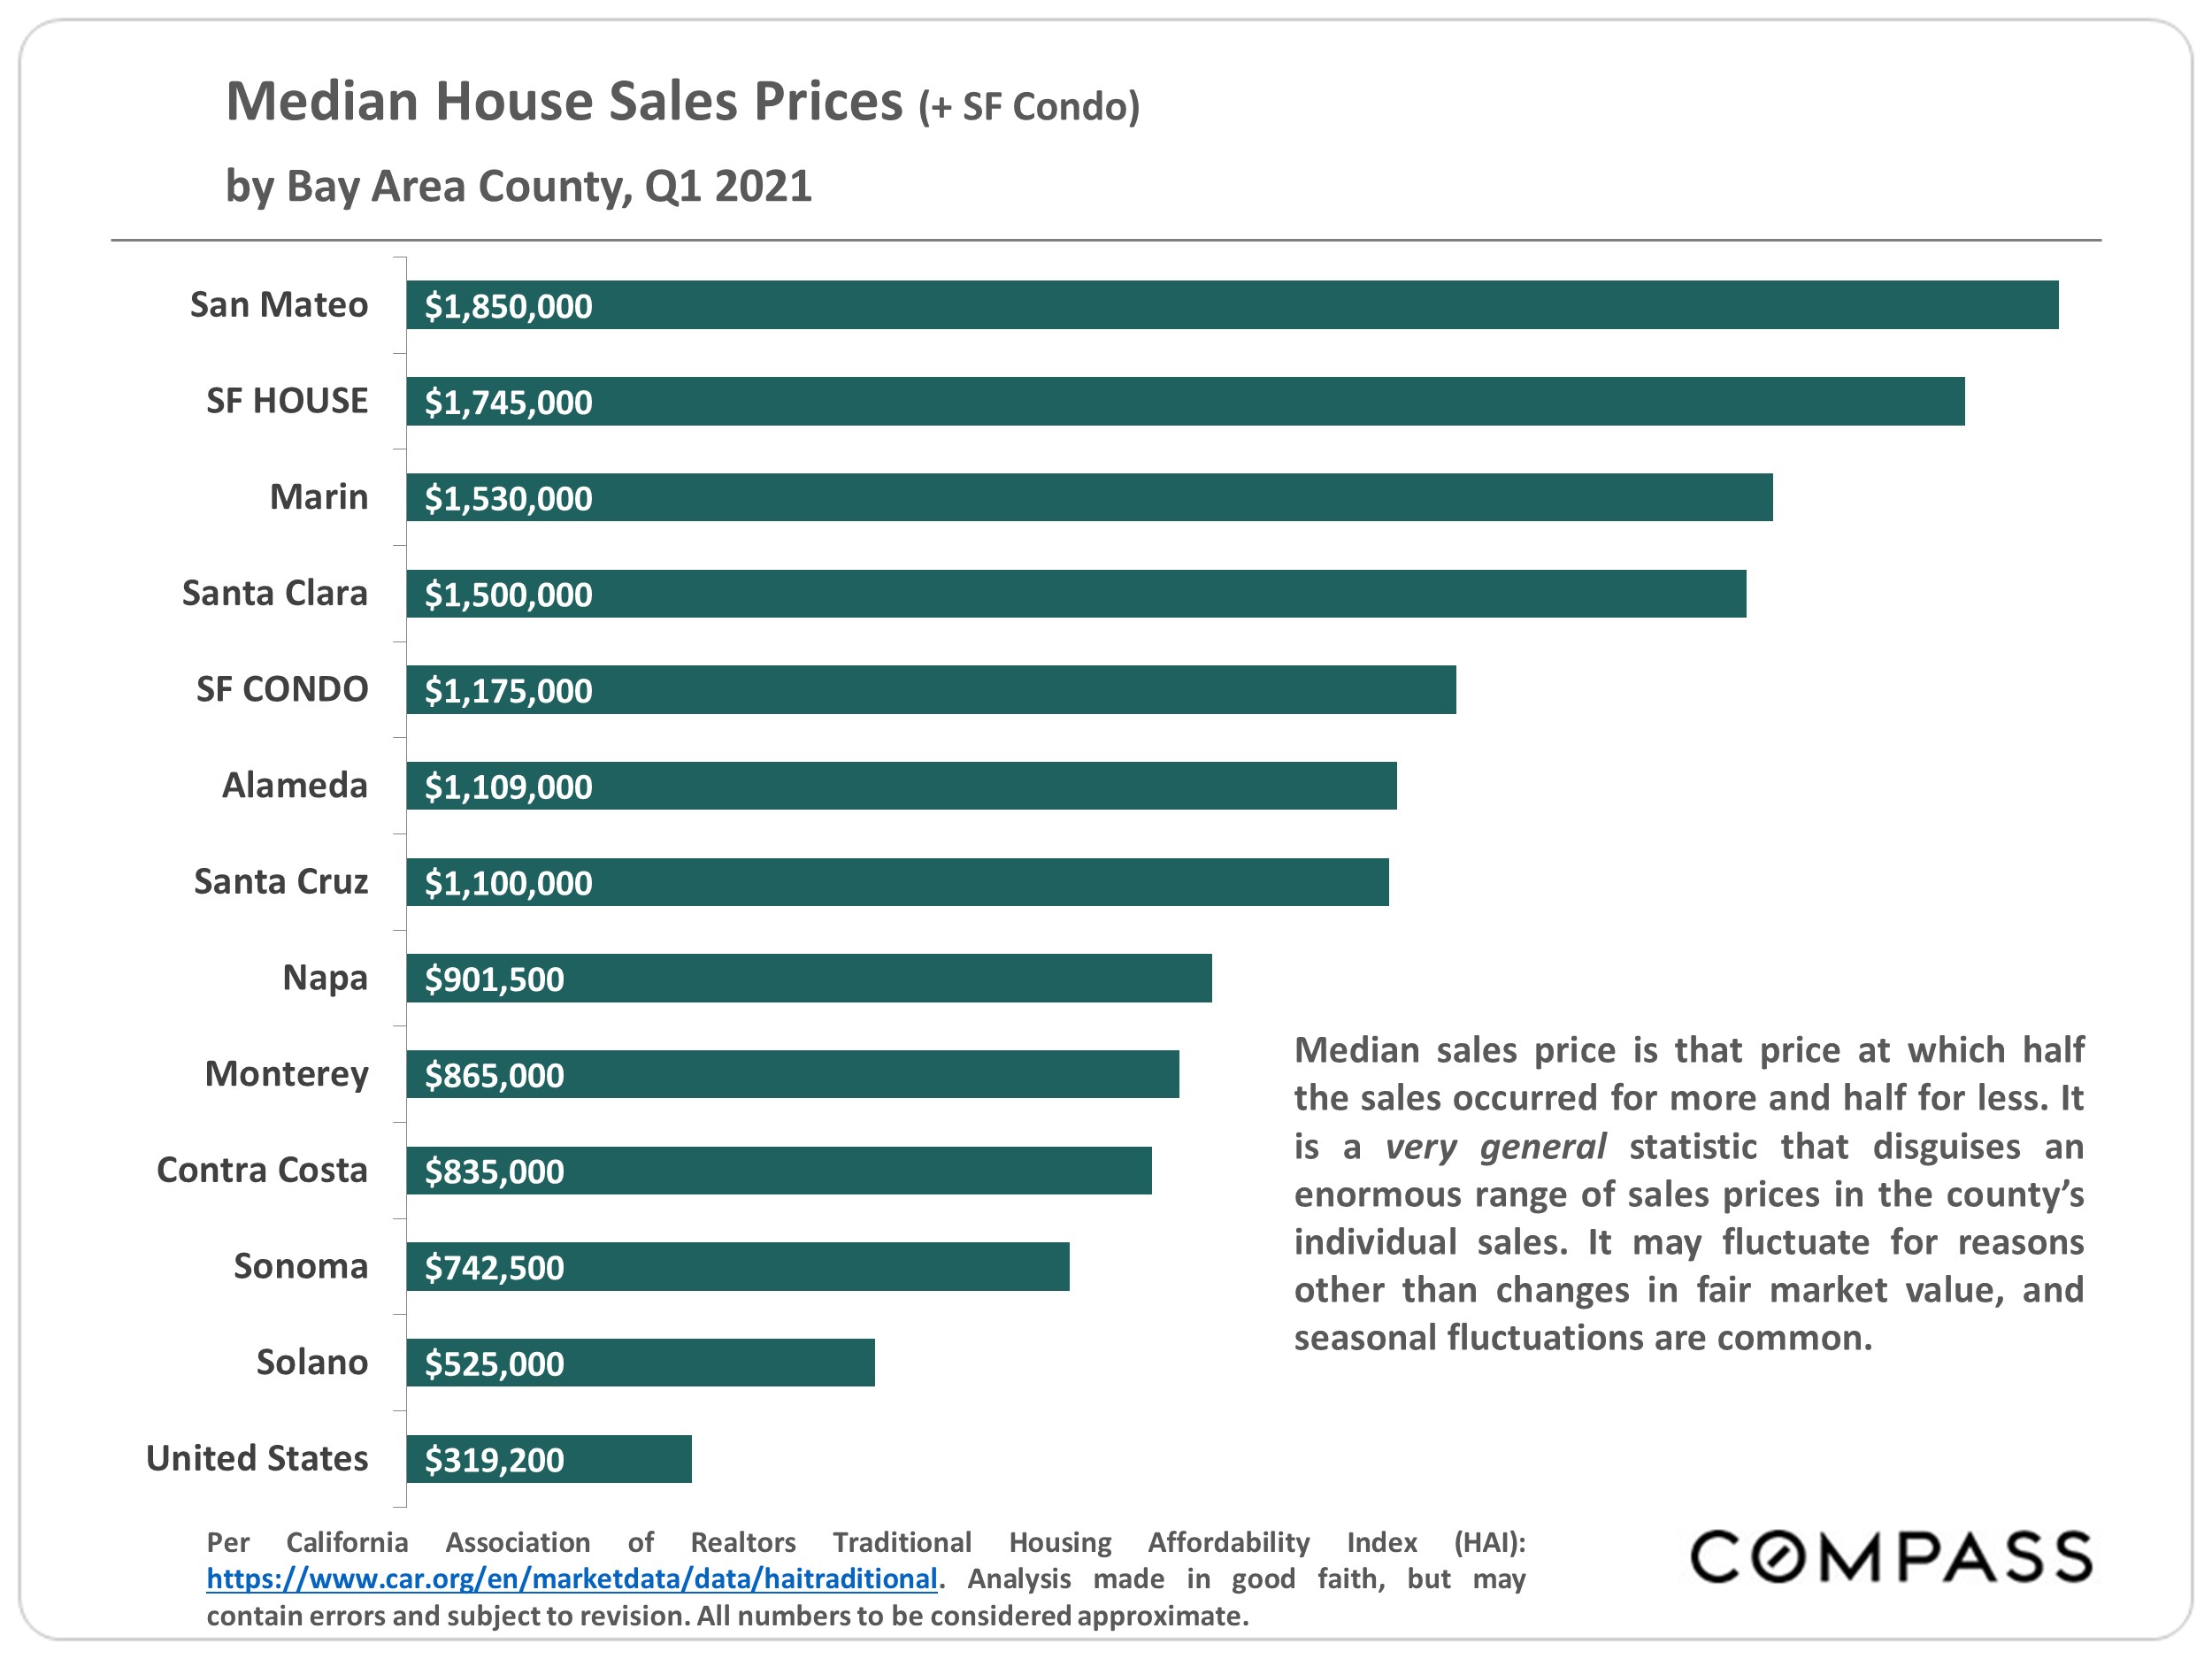 Chart showing the Median House Sales Prices (+ SF Condo) by Bay Area County, Q1 2021